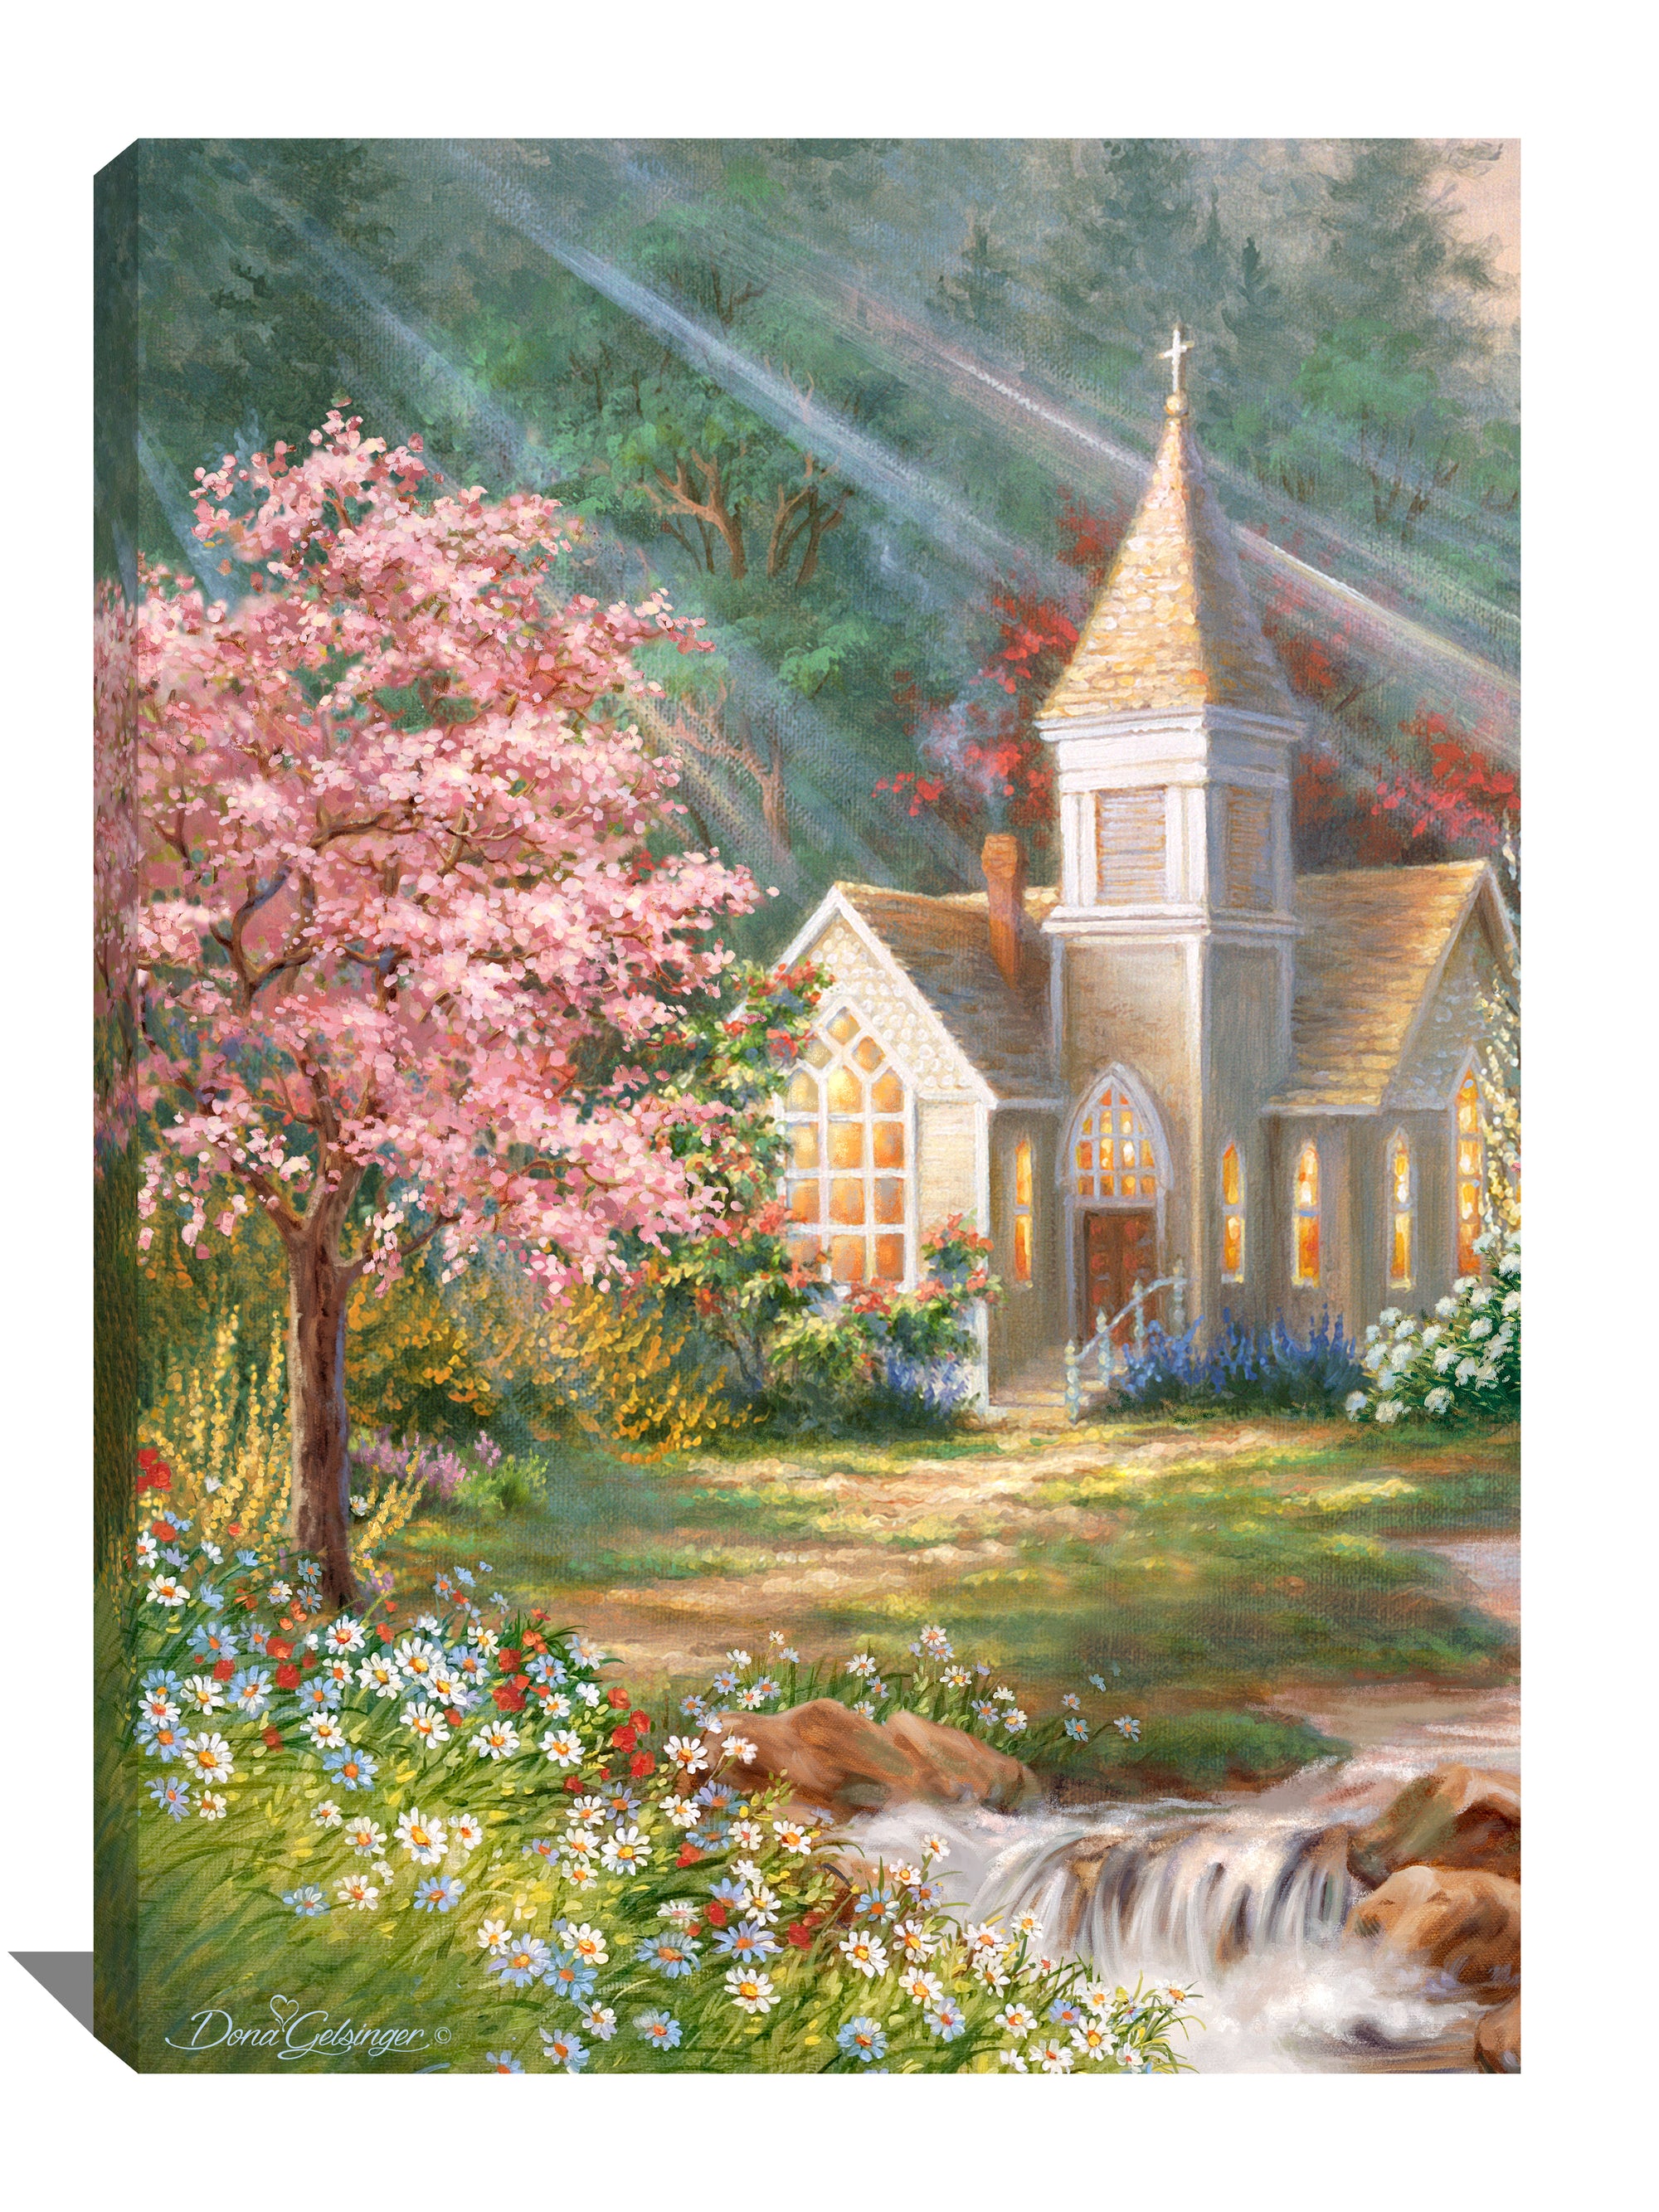 This breathtaking piece features a majestic chapel standing tall amidst a stunning spring scene. A beautiful tree adorned with pink cherry blossoms takes center stage, perfectly complementing the tranquil surroundings.